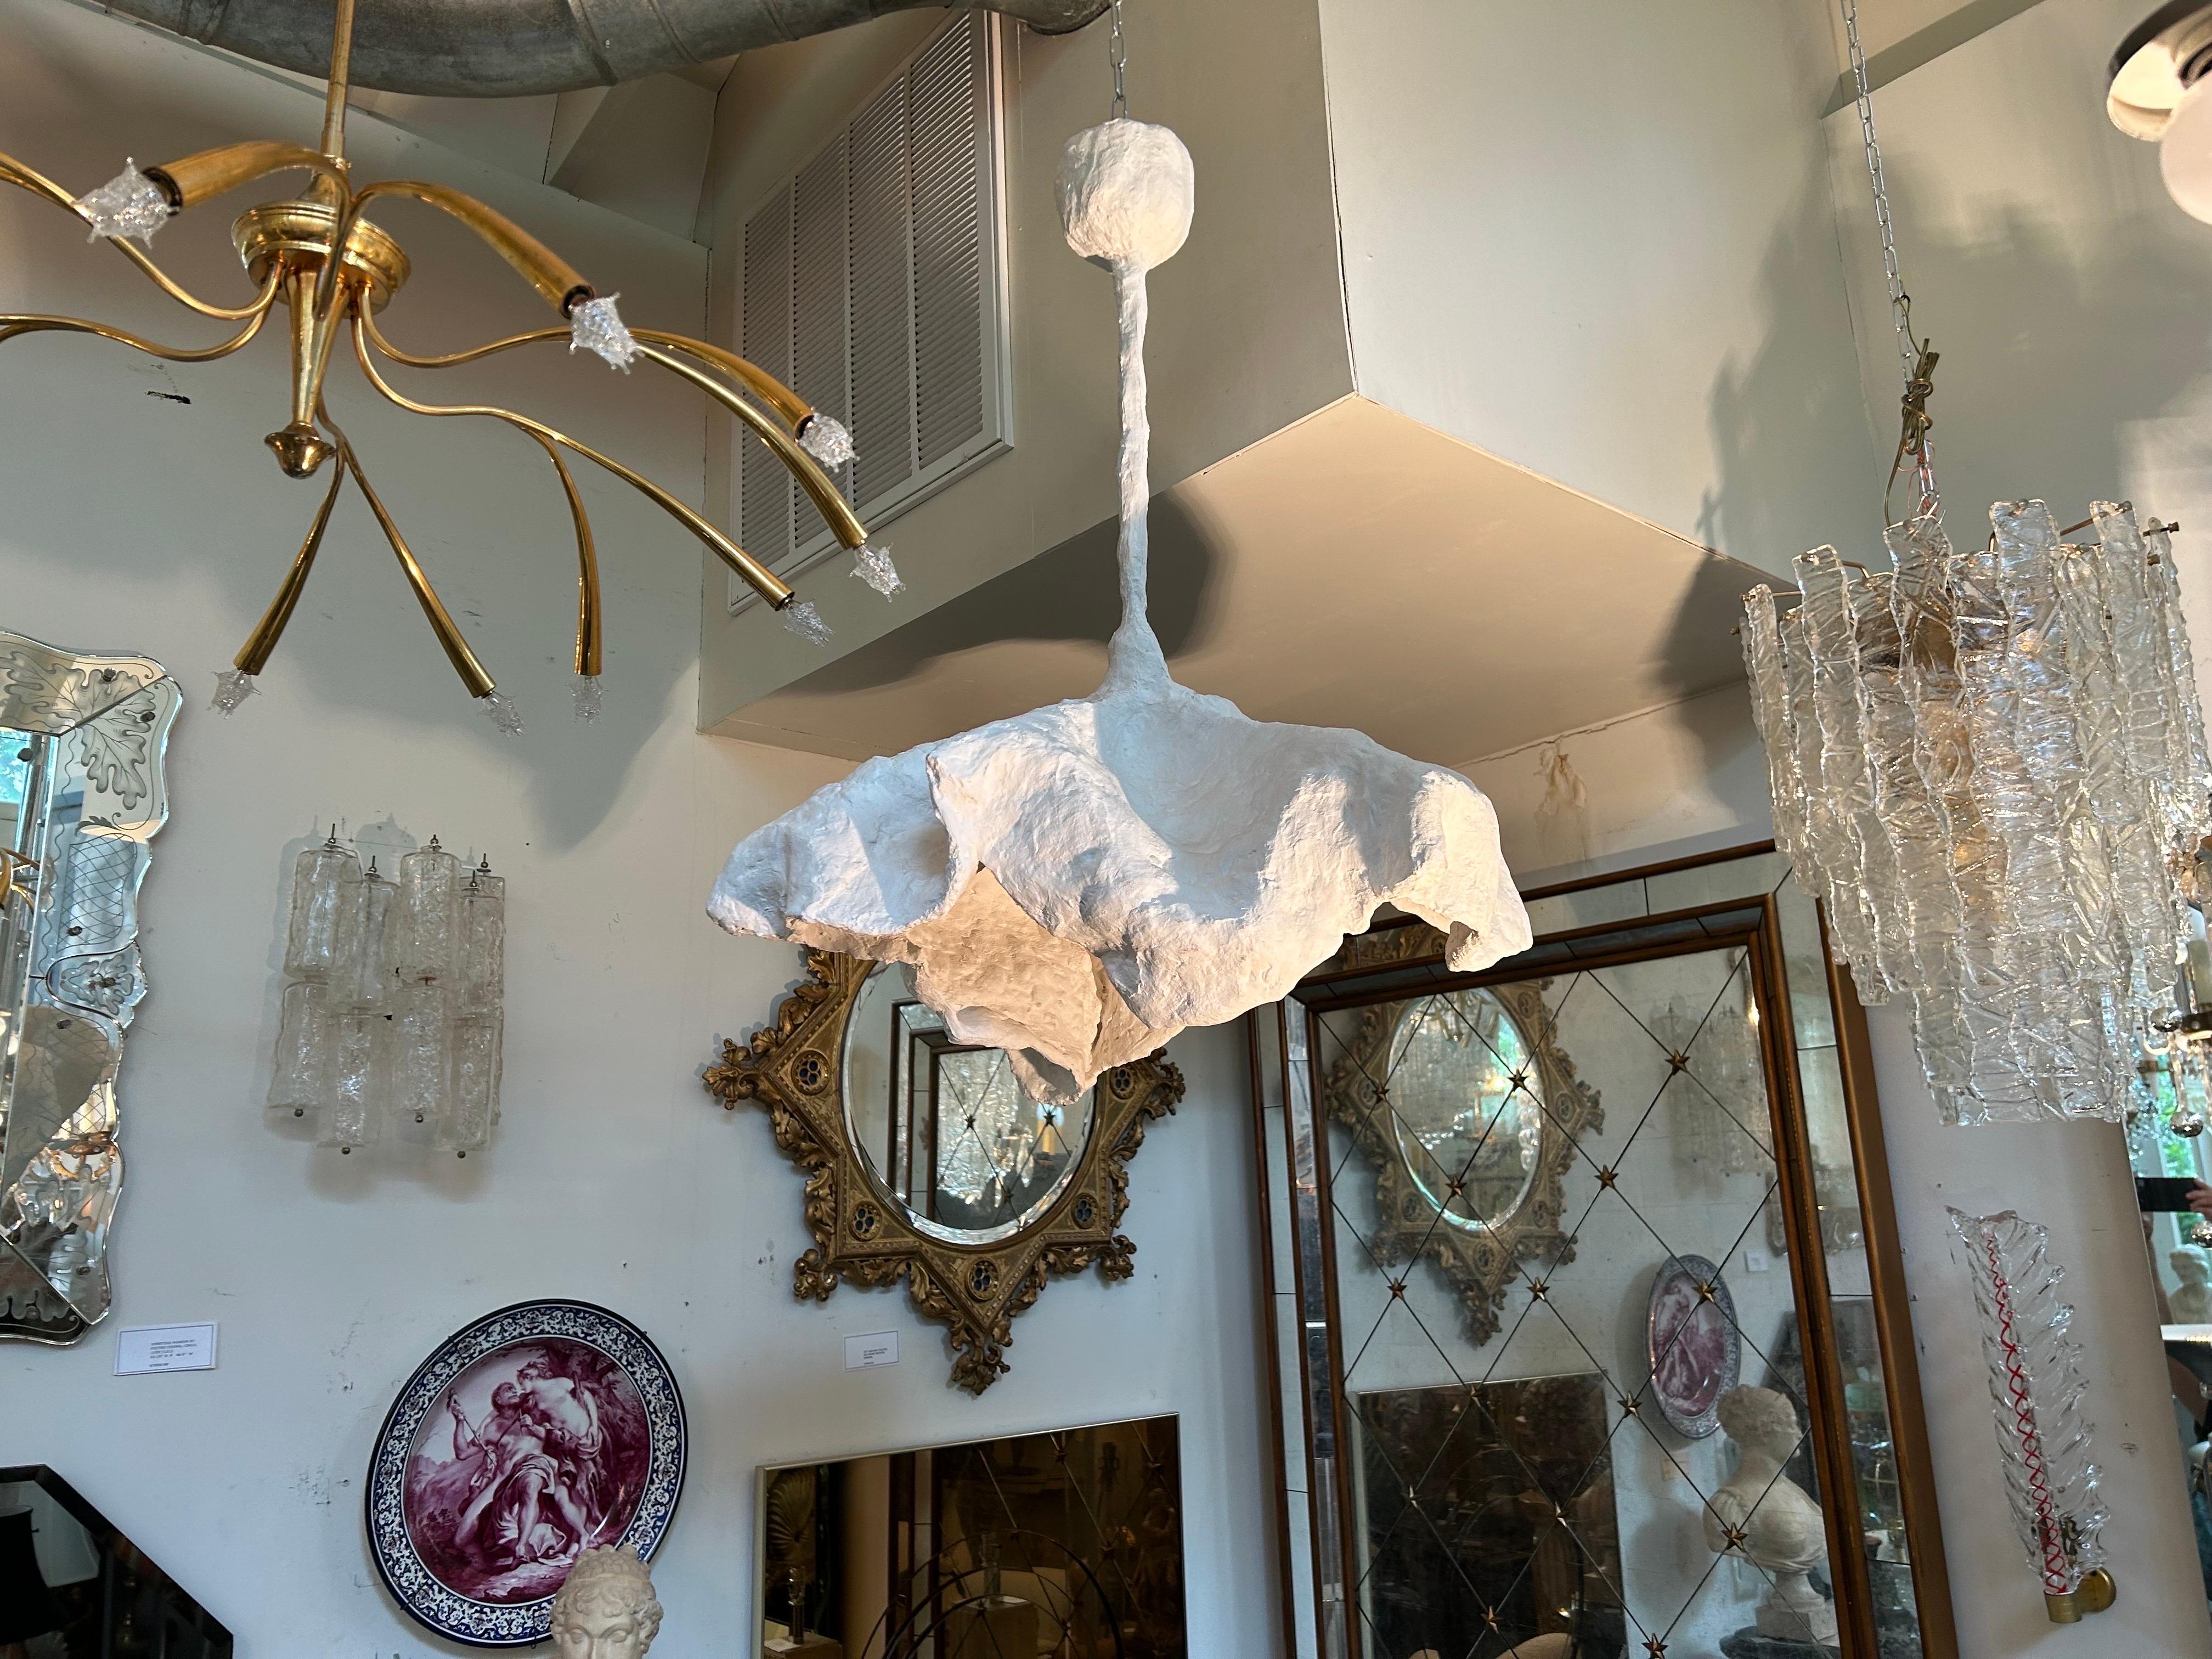 French Organic Modern Plaster Chandelier.
Outstanding French Serge Roche inspired plaster chandelier, pendant or lantern with its organic modern feel has been newly wired with a new Edison socket for the U.S. market.
Chandelier height without chain